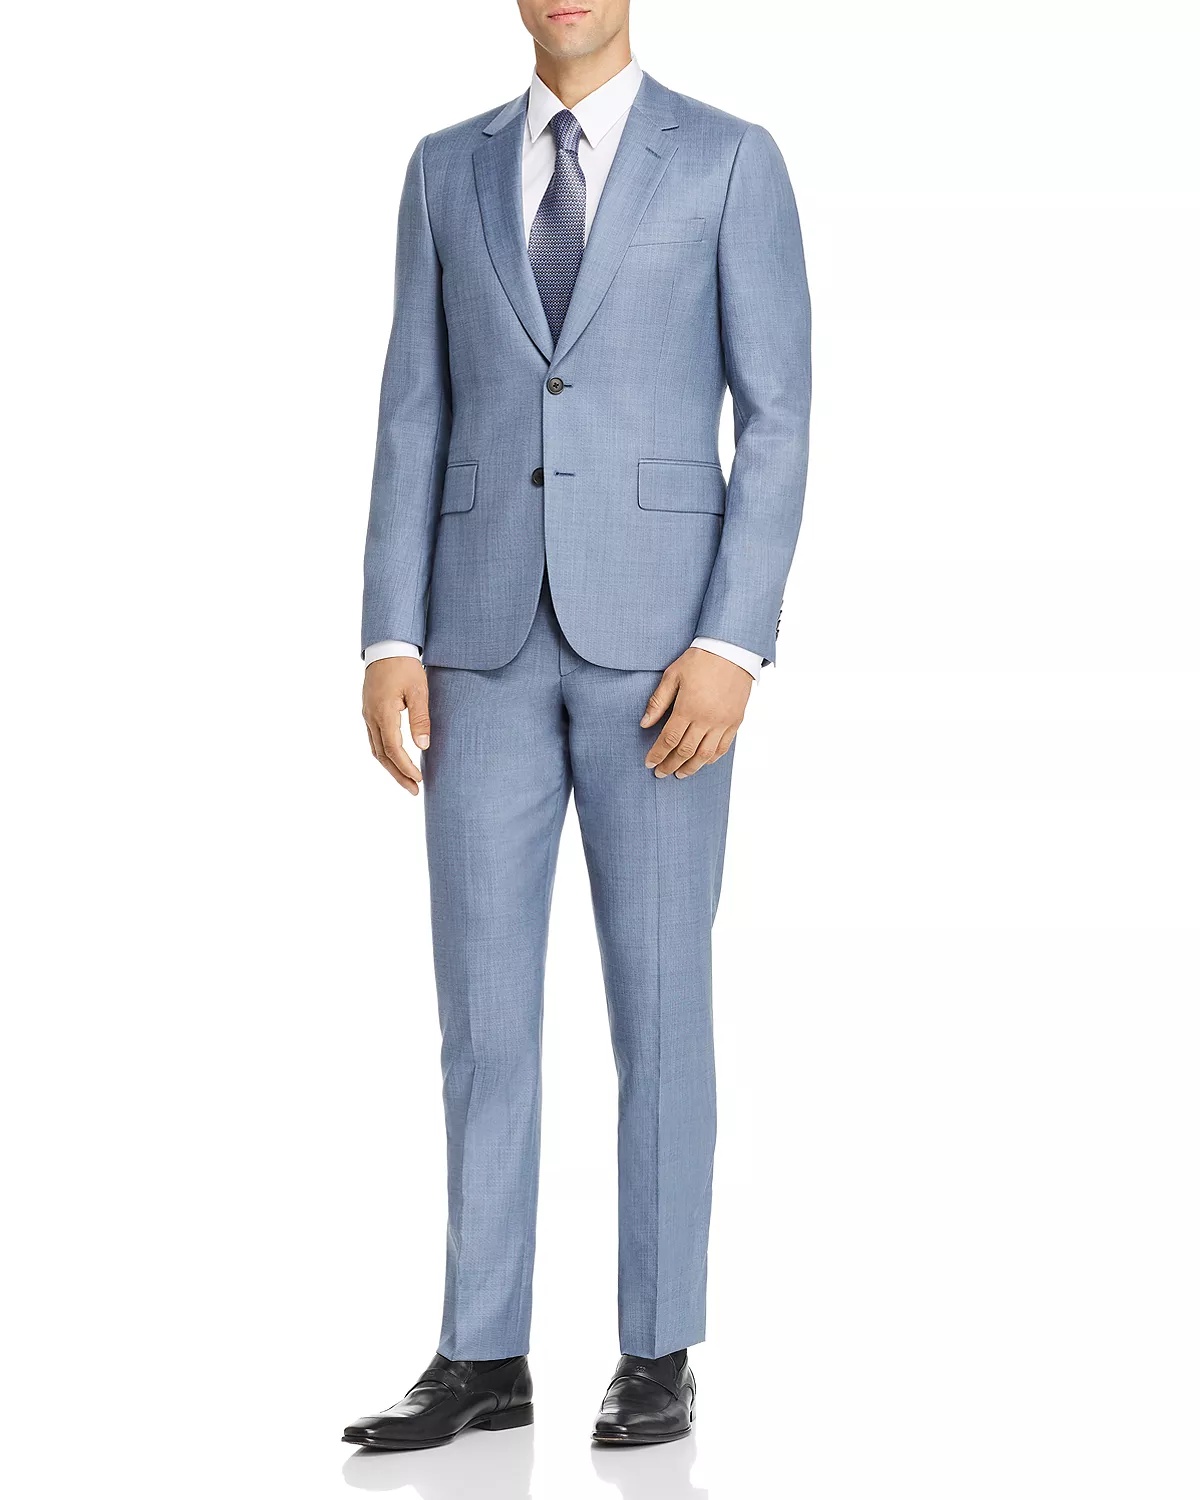 Soho Sharkskin Extra Slim Fit Suit - 100% Exclusive - 1